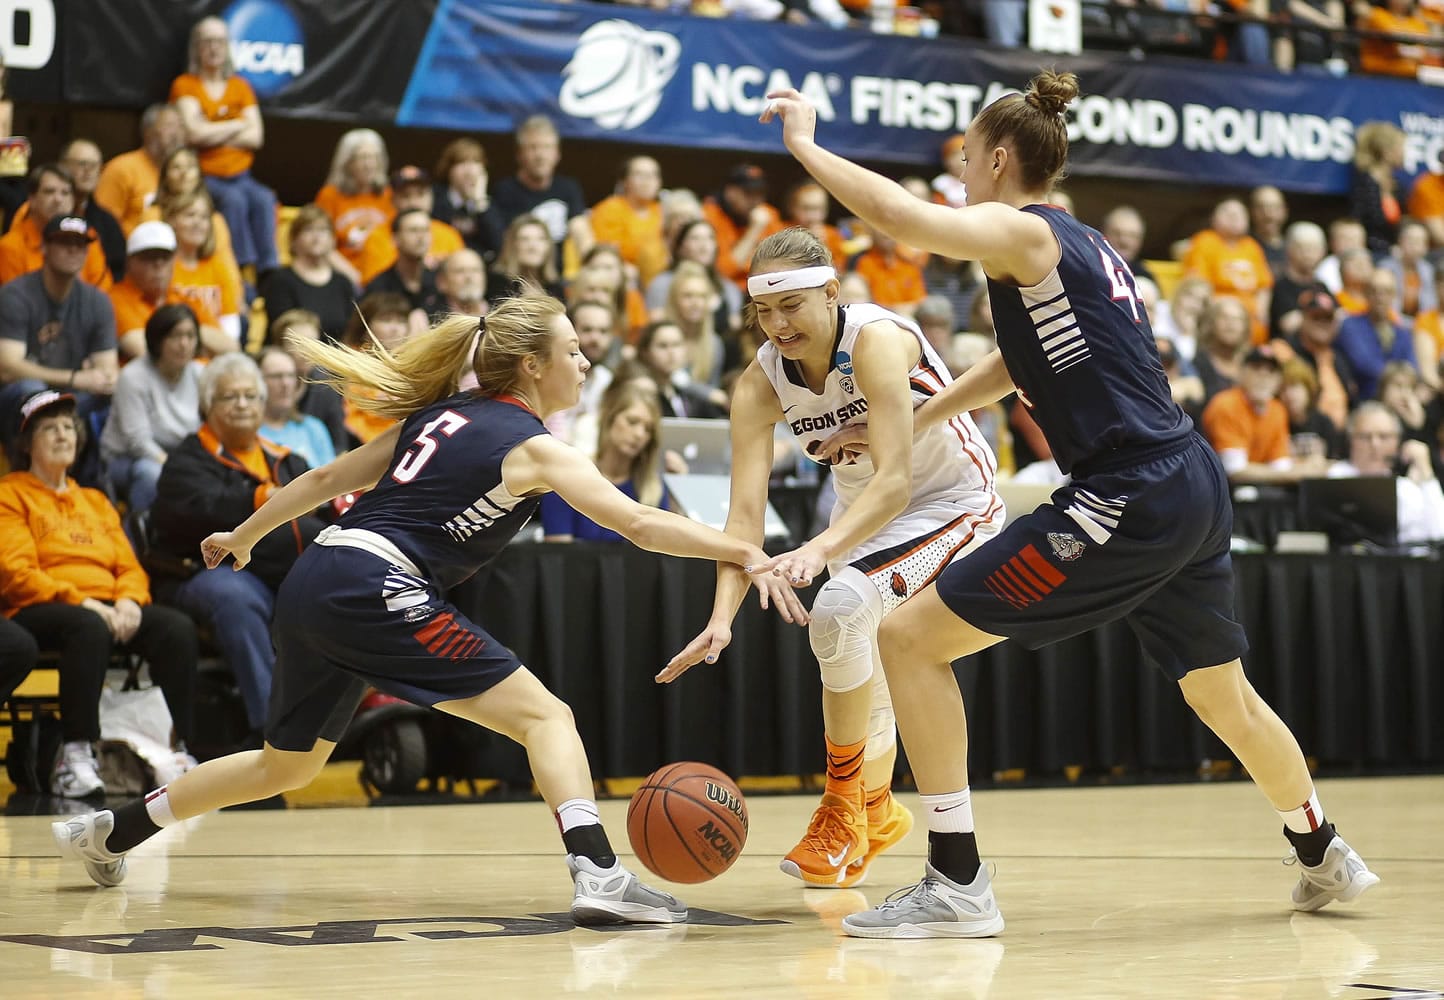 Oregon State's Sydney Wiese, center, tries to split Gonzaga's Georgia Stirton, left, and Shelby Cheslek, right, during the first half of the second round NCAA tournament game at Corvallis, Ore., Sunday, March 22, 2015. (AP Photo/Timothy J.